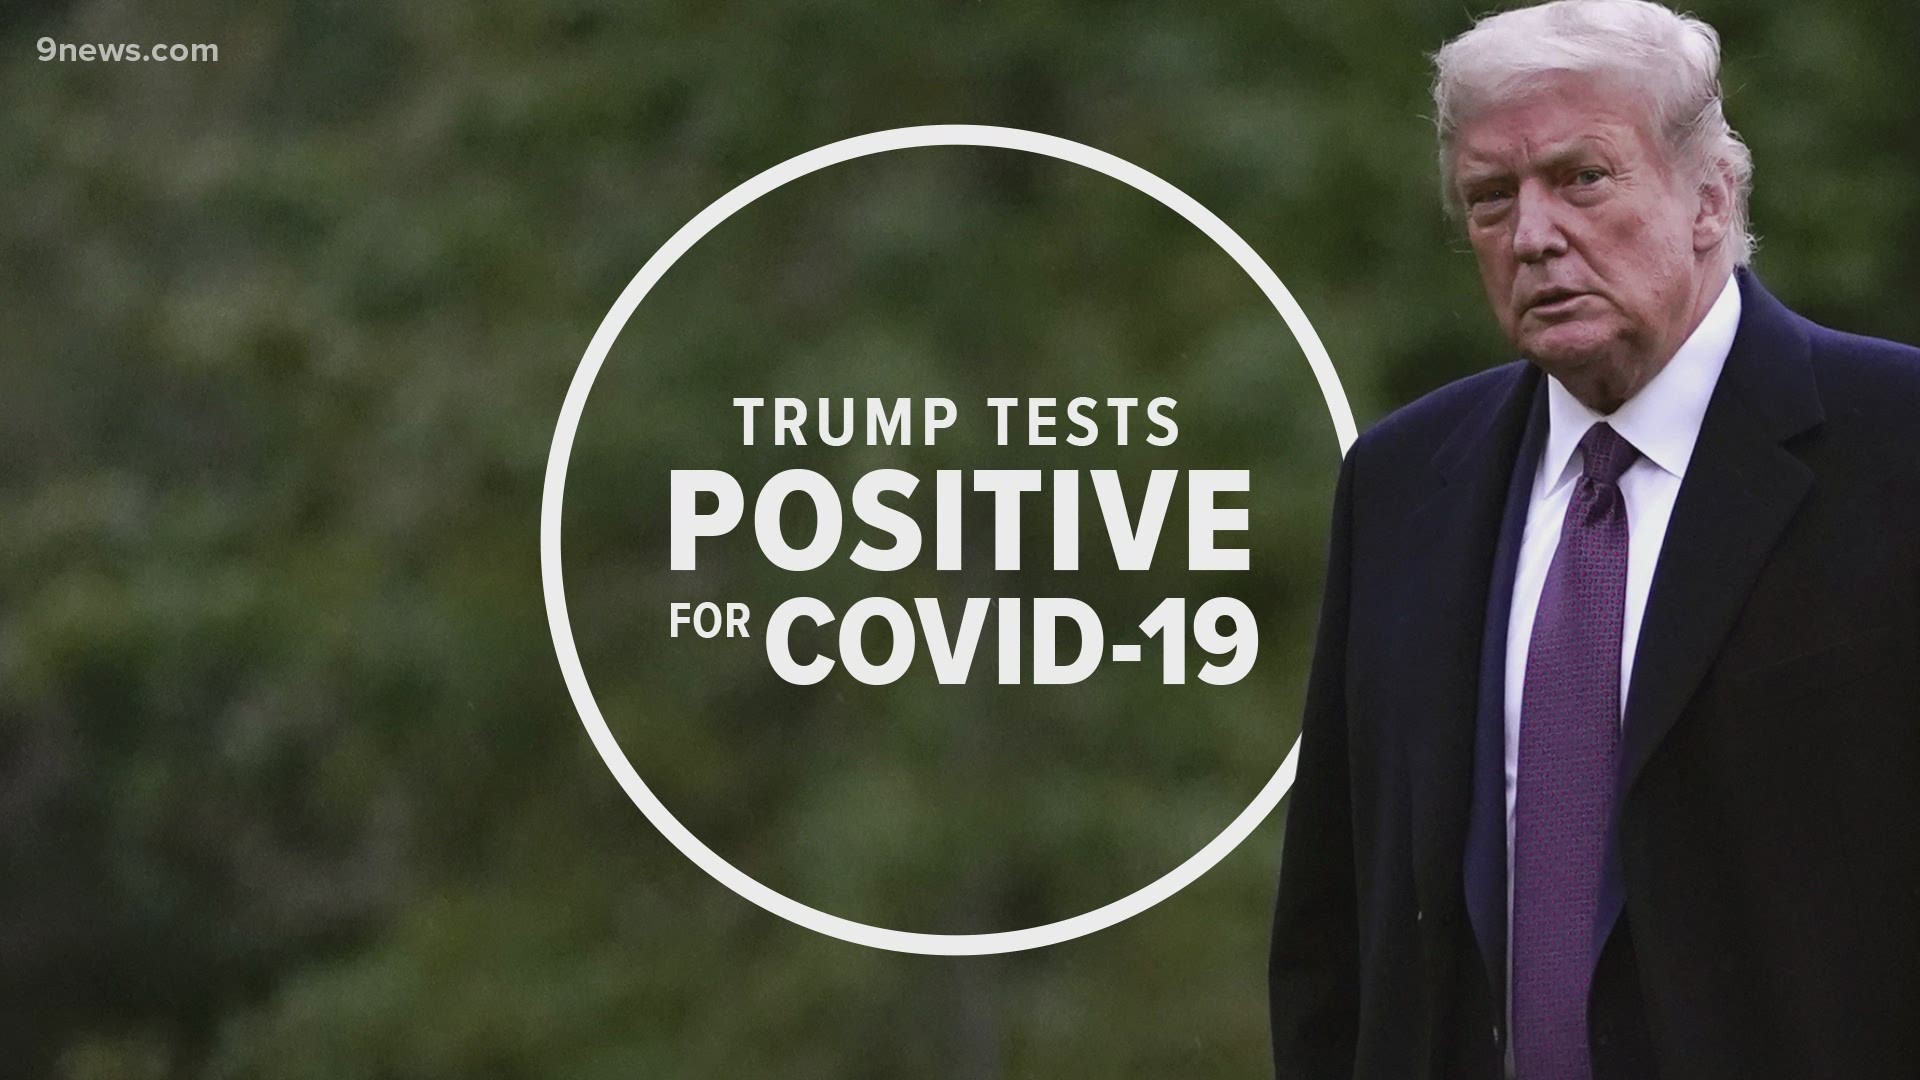 9Health Expert Dr. Payal Kohli explains how President Trump, 74, is at a higher risk of COVID-19 complications due to his age, his body mass index and other factors.